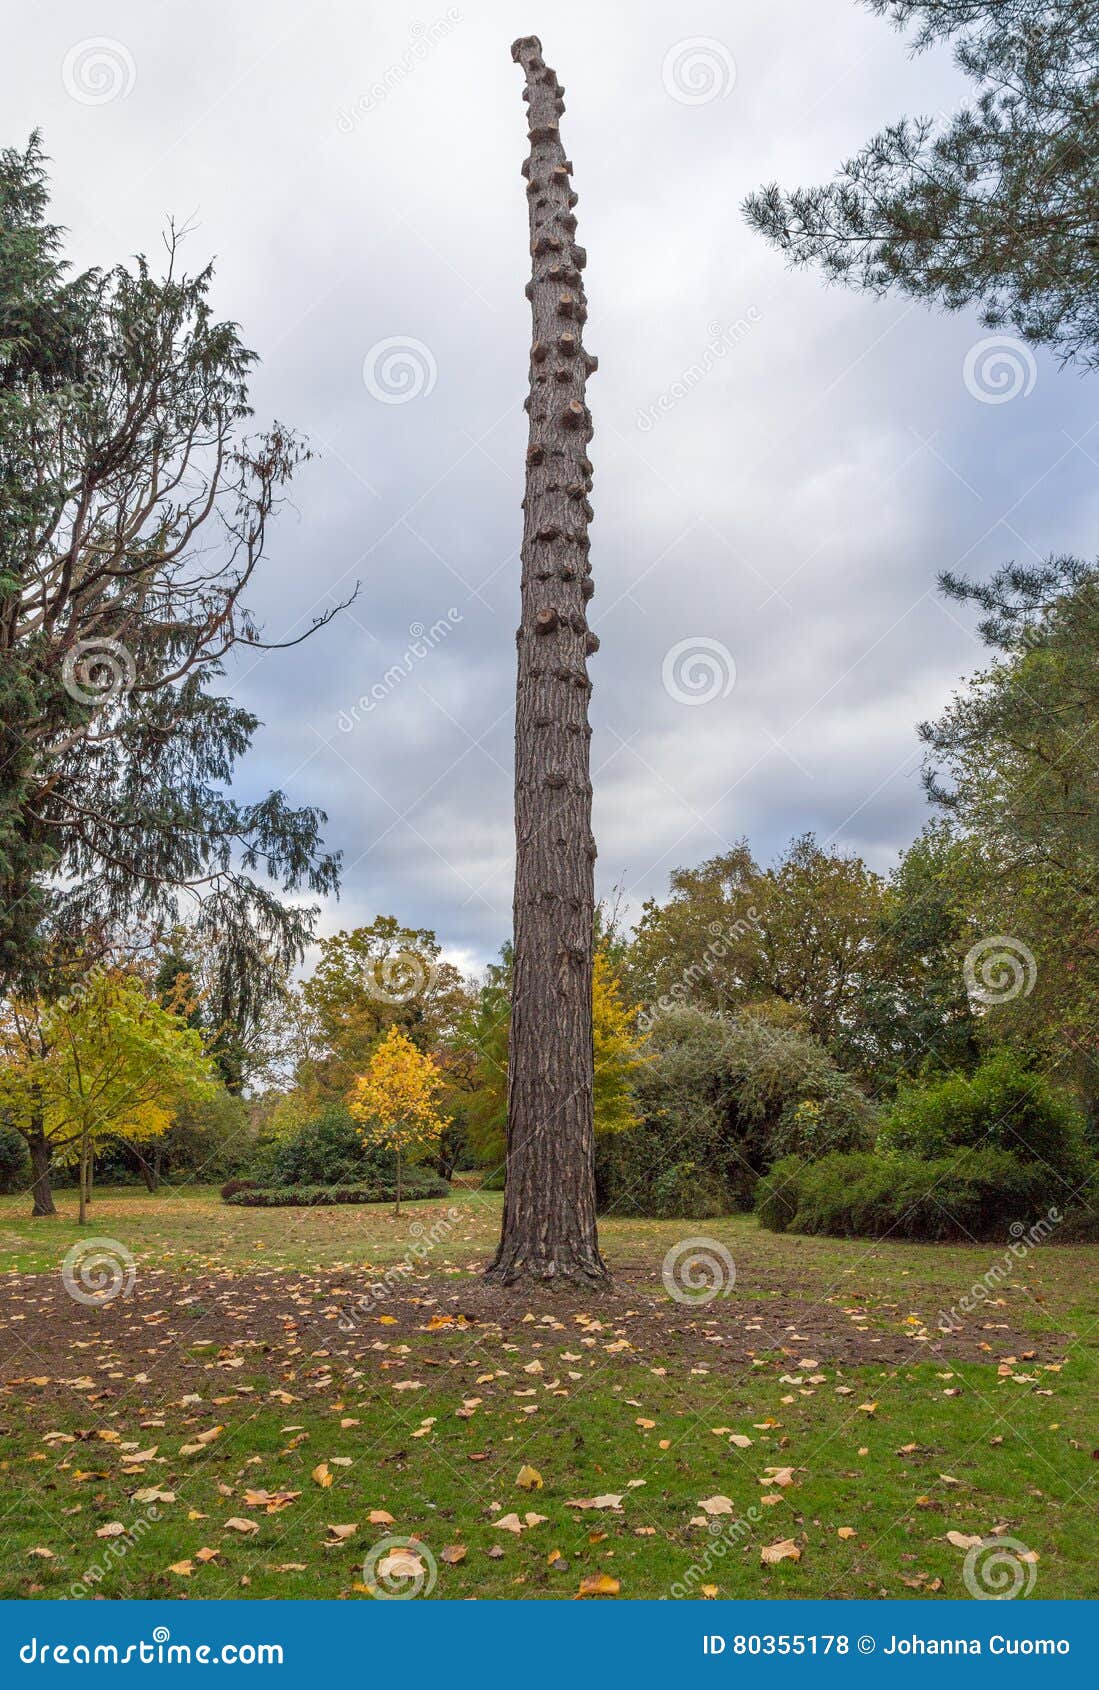 tall-tree-no-branches-autumnal-setting-took-visit-to-glade-sidcup-kent-was-surprised-to-see-where-80355178.jpg